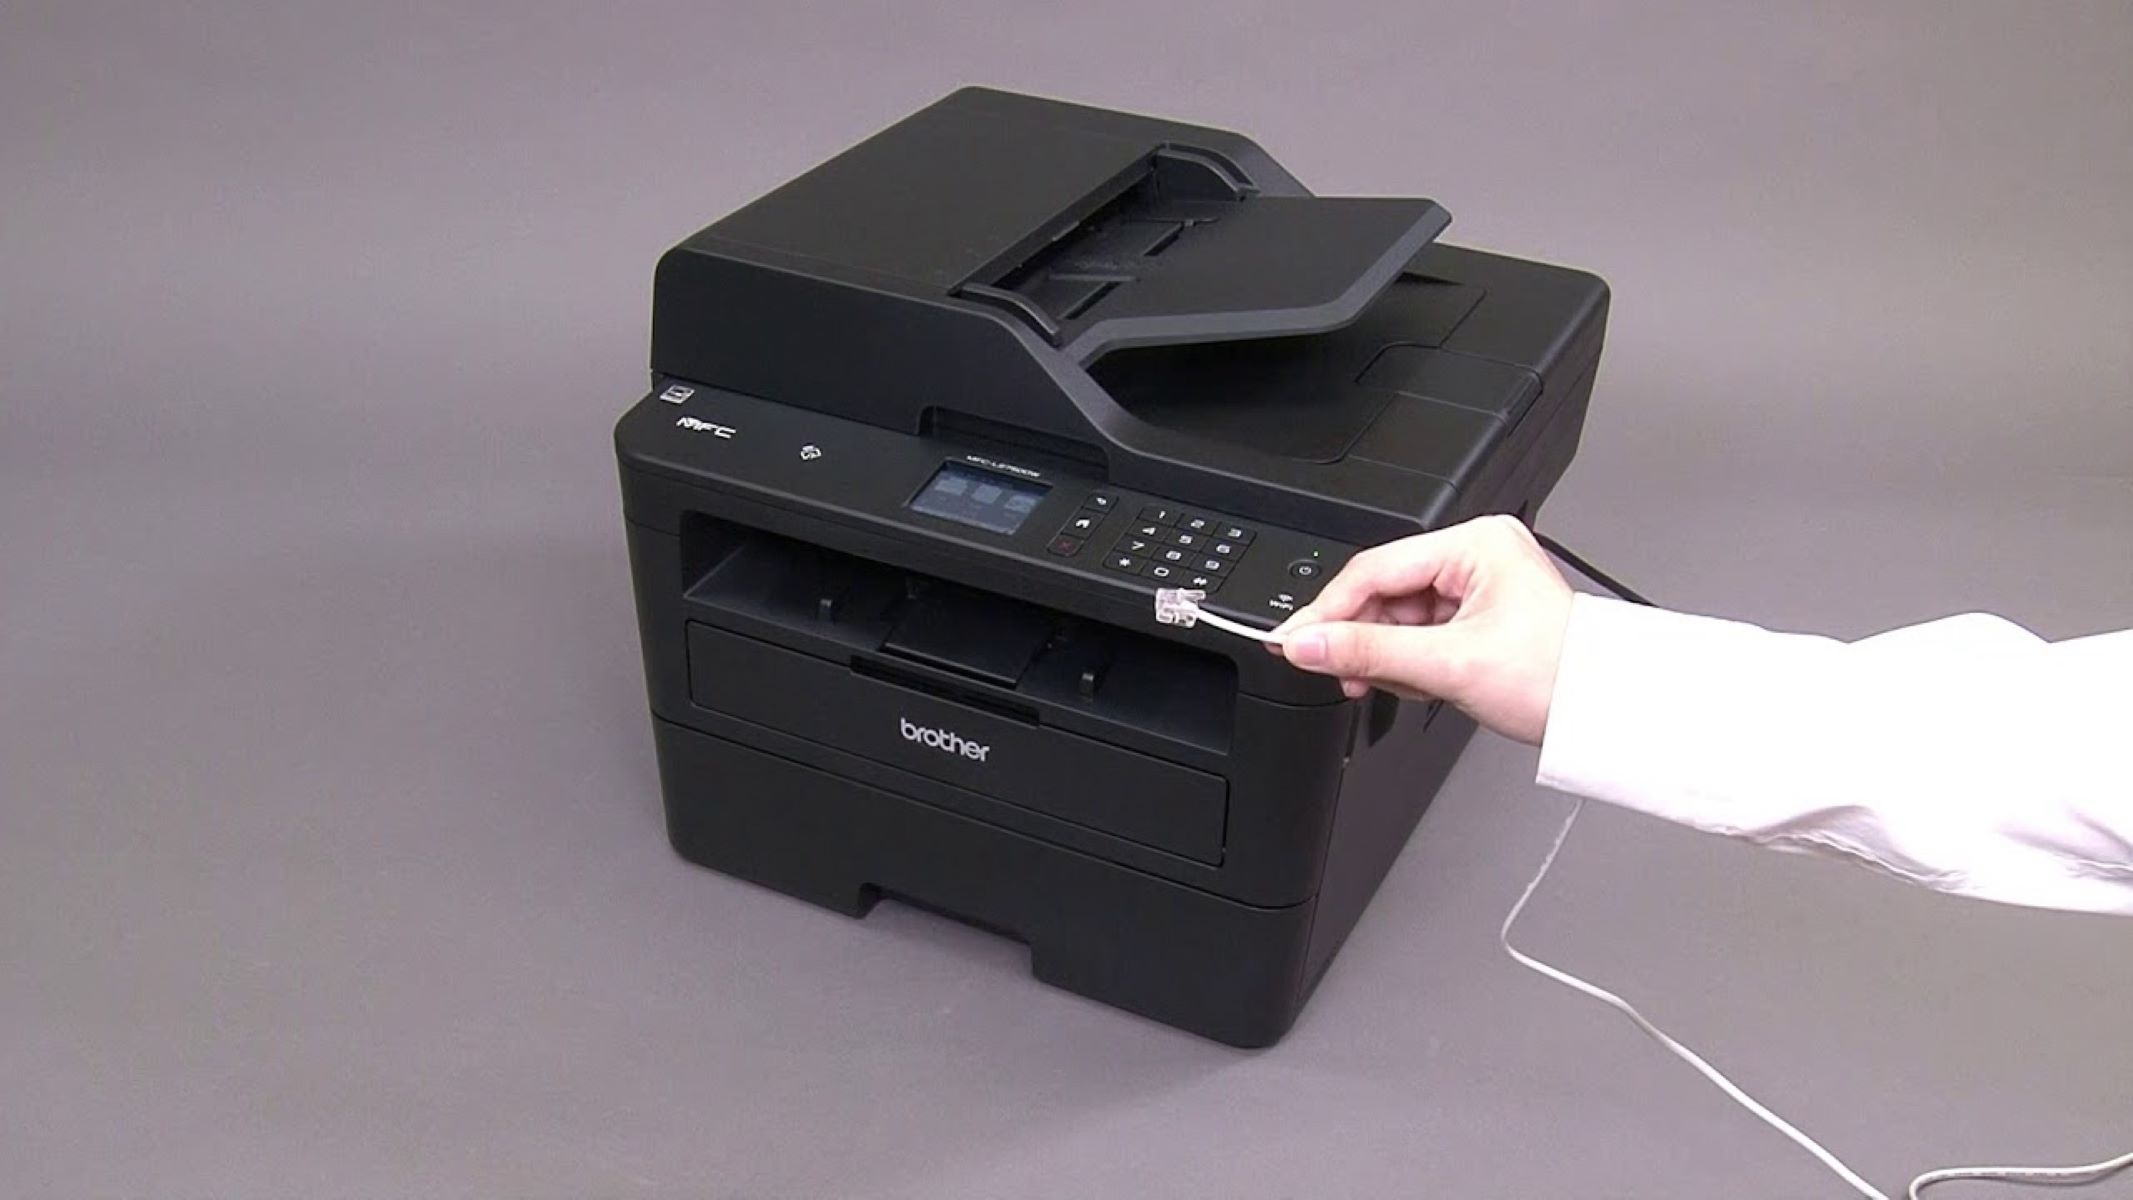 How To Fax On Brother Printer